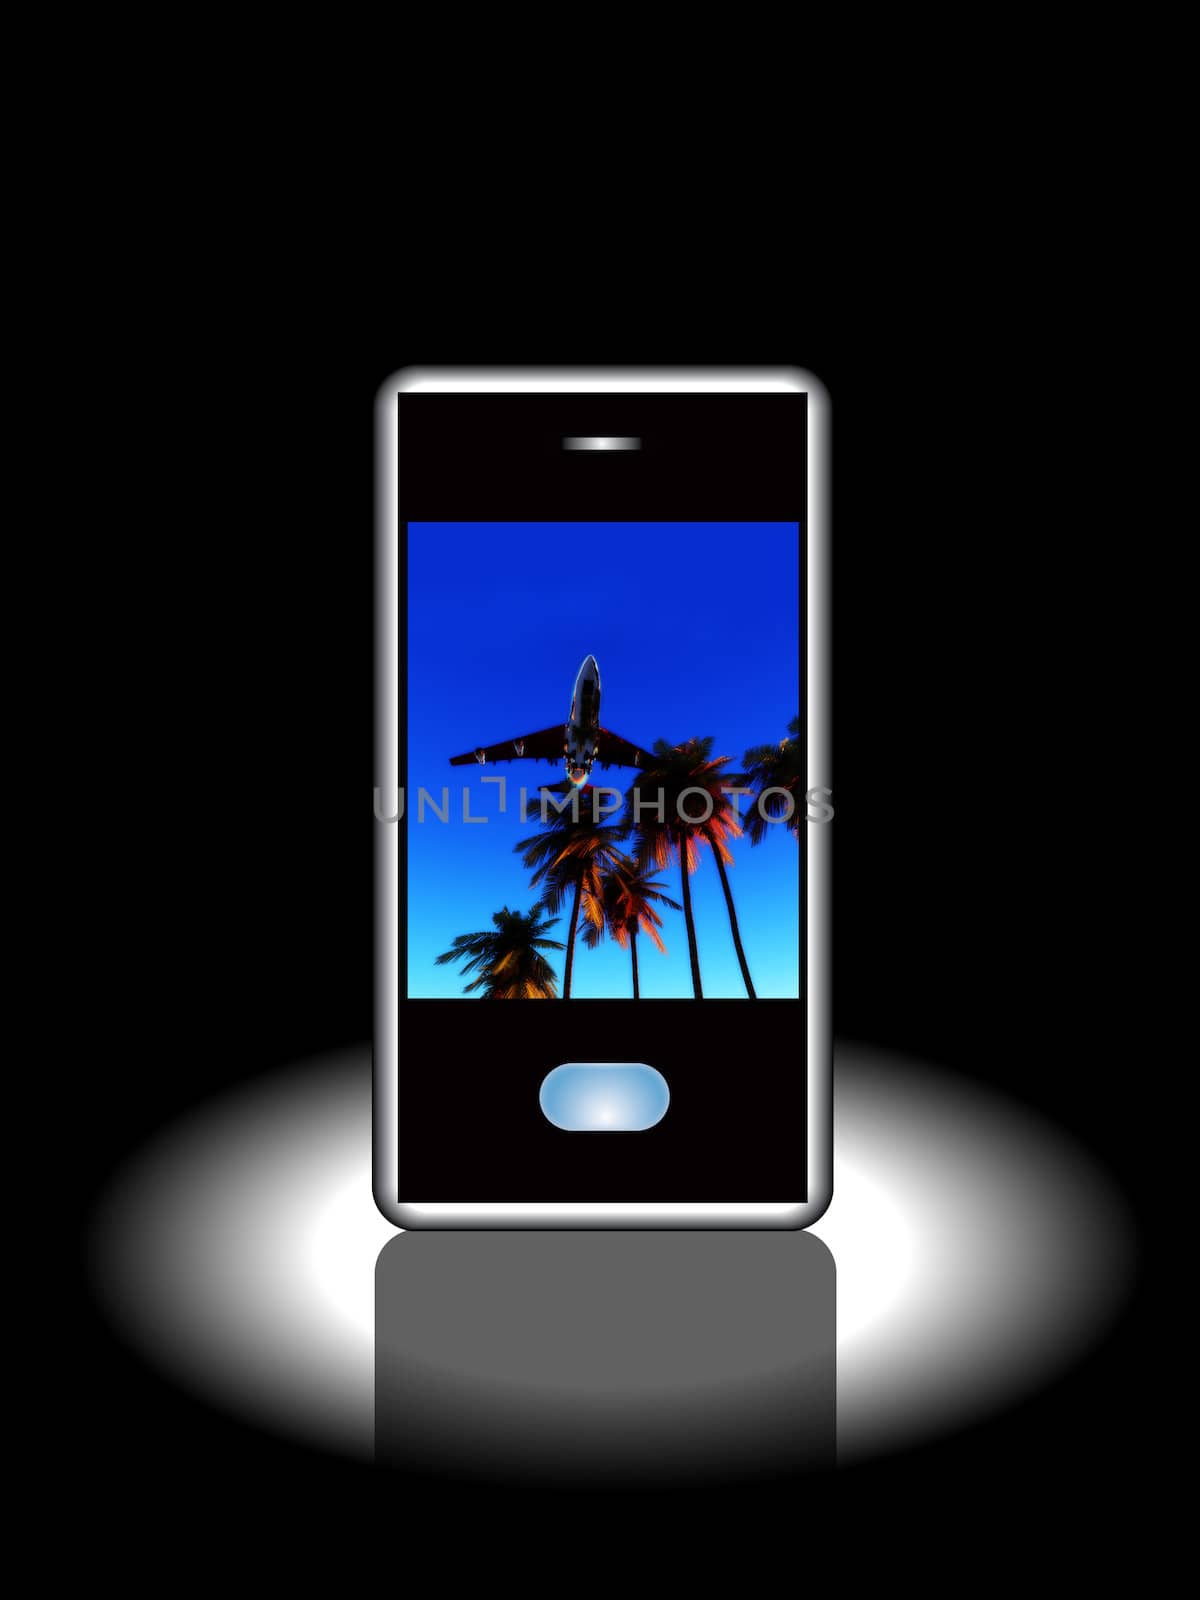 A posh mobile phone with a image of a tropical scene.